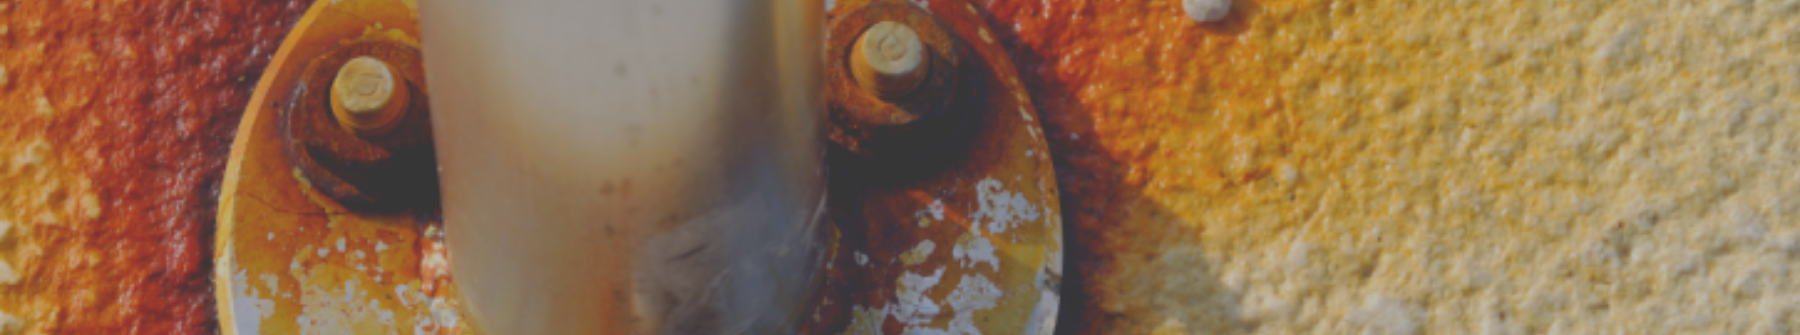 The Insight: Galvanic Corrosion and Fasteners